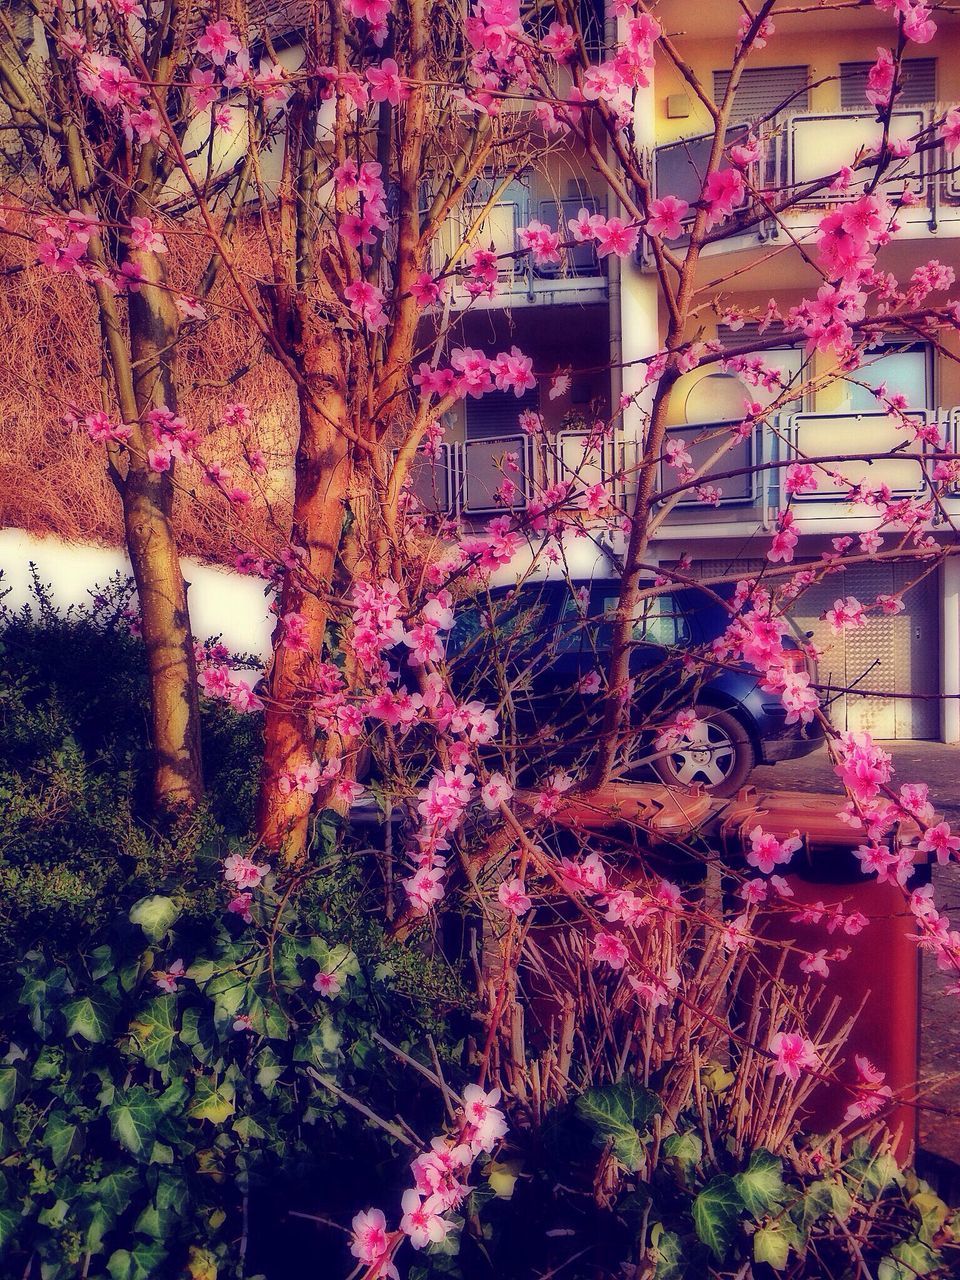 flower, growth, plant, tree, freshness, built structure, pink color, building exterior, nature, beauty in nature, architecture, fragility, house, in bloom, branch, outdoors, purple, blooming, growing, no people